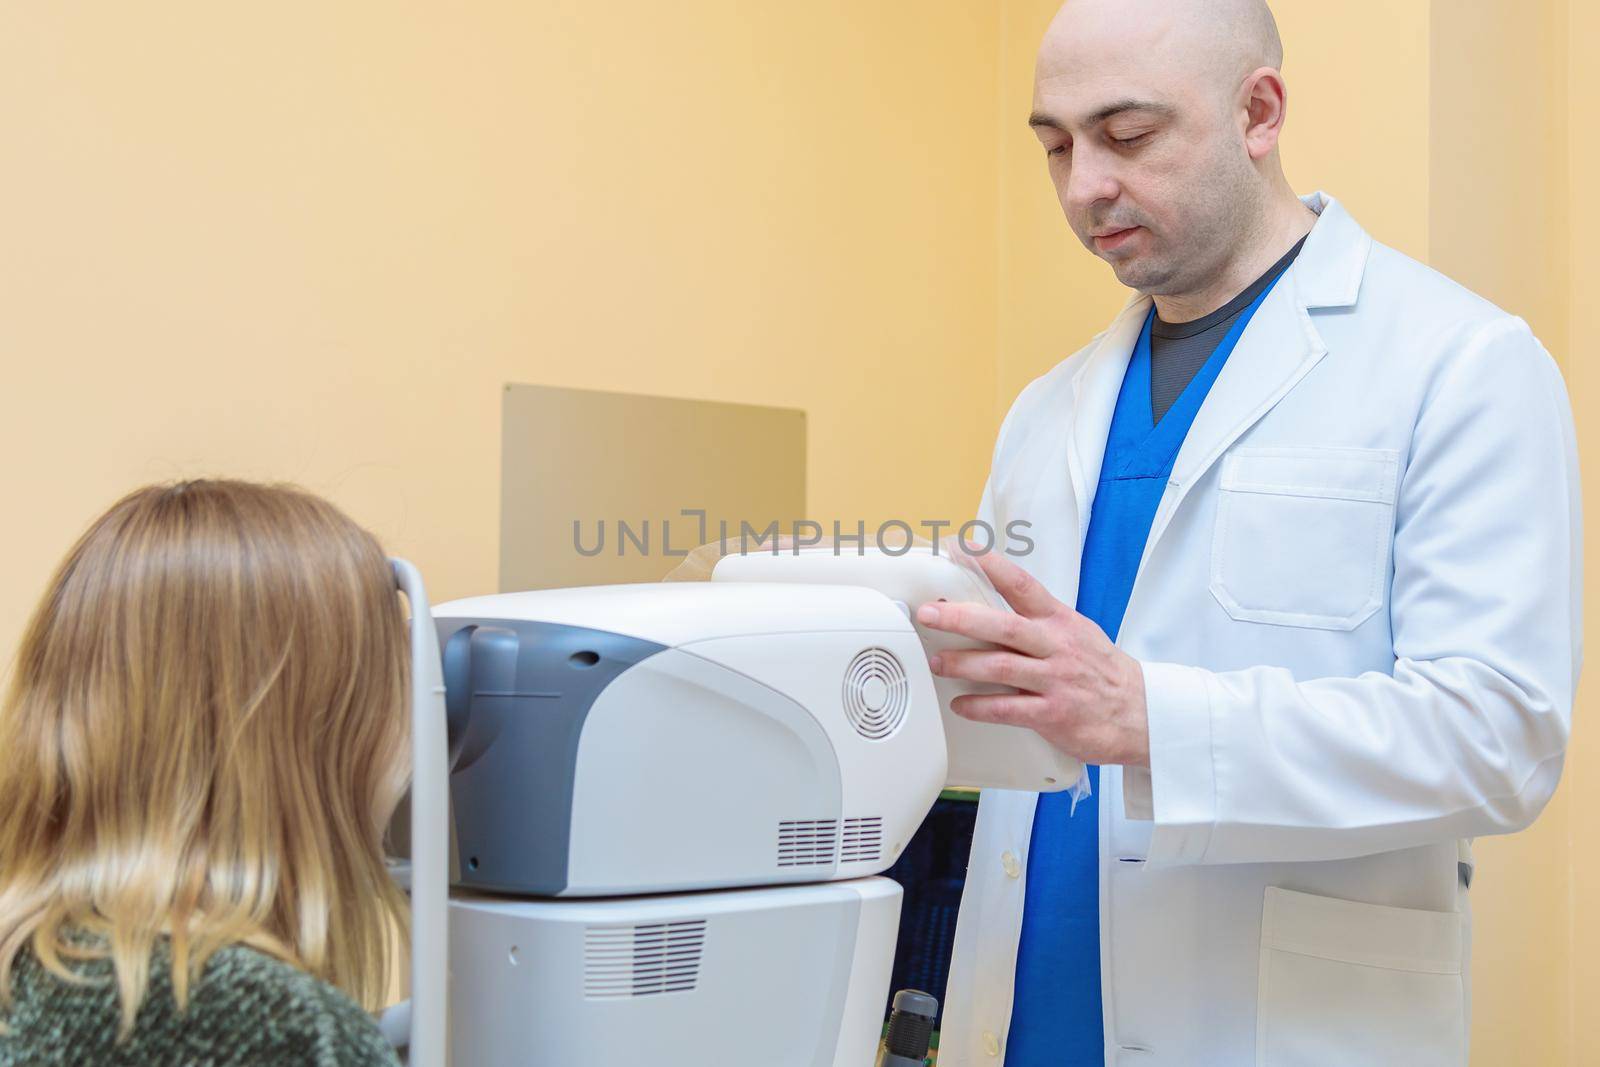 A male ophthalmologist checks the eyesight of a young girl using a modern vision tester.